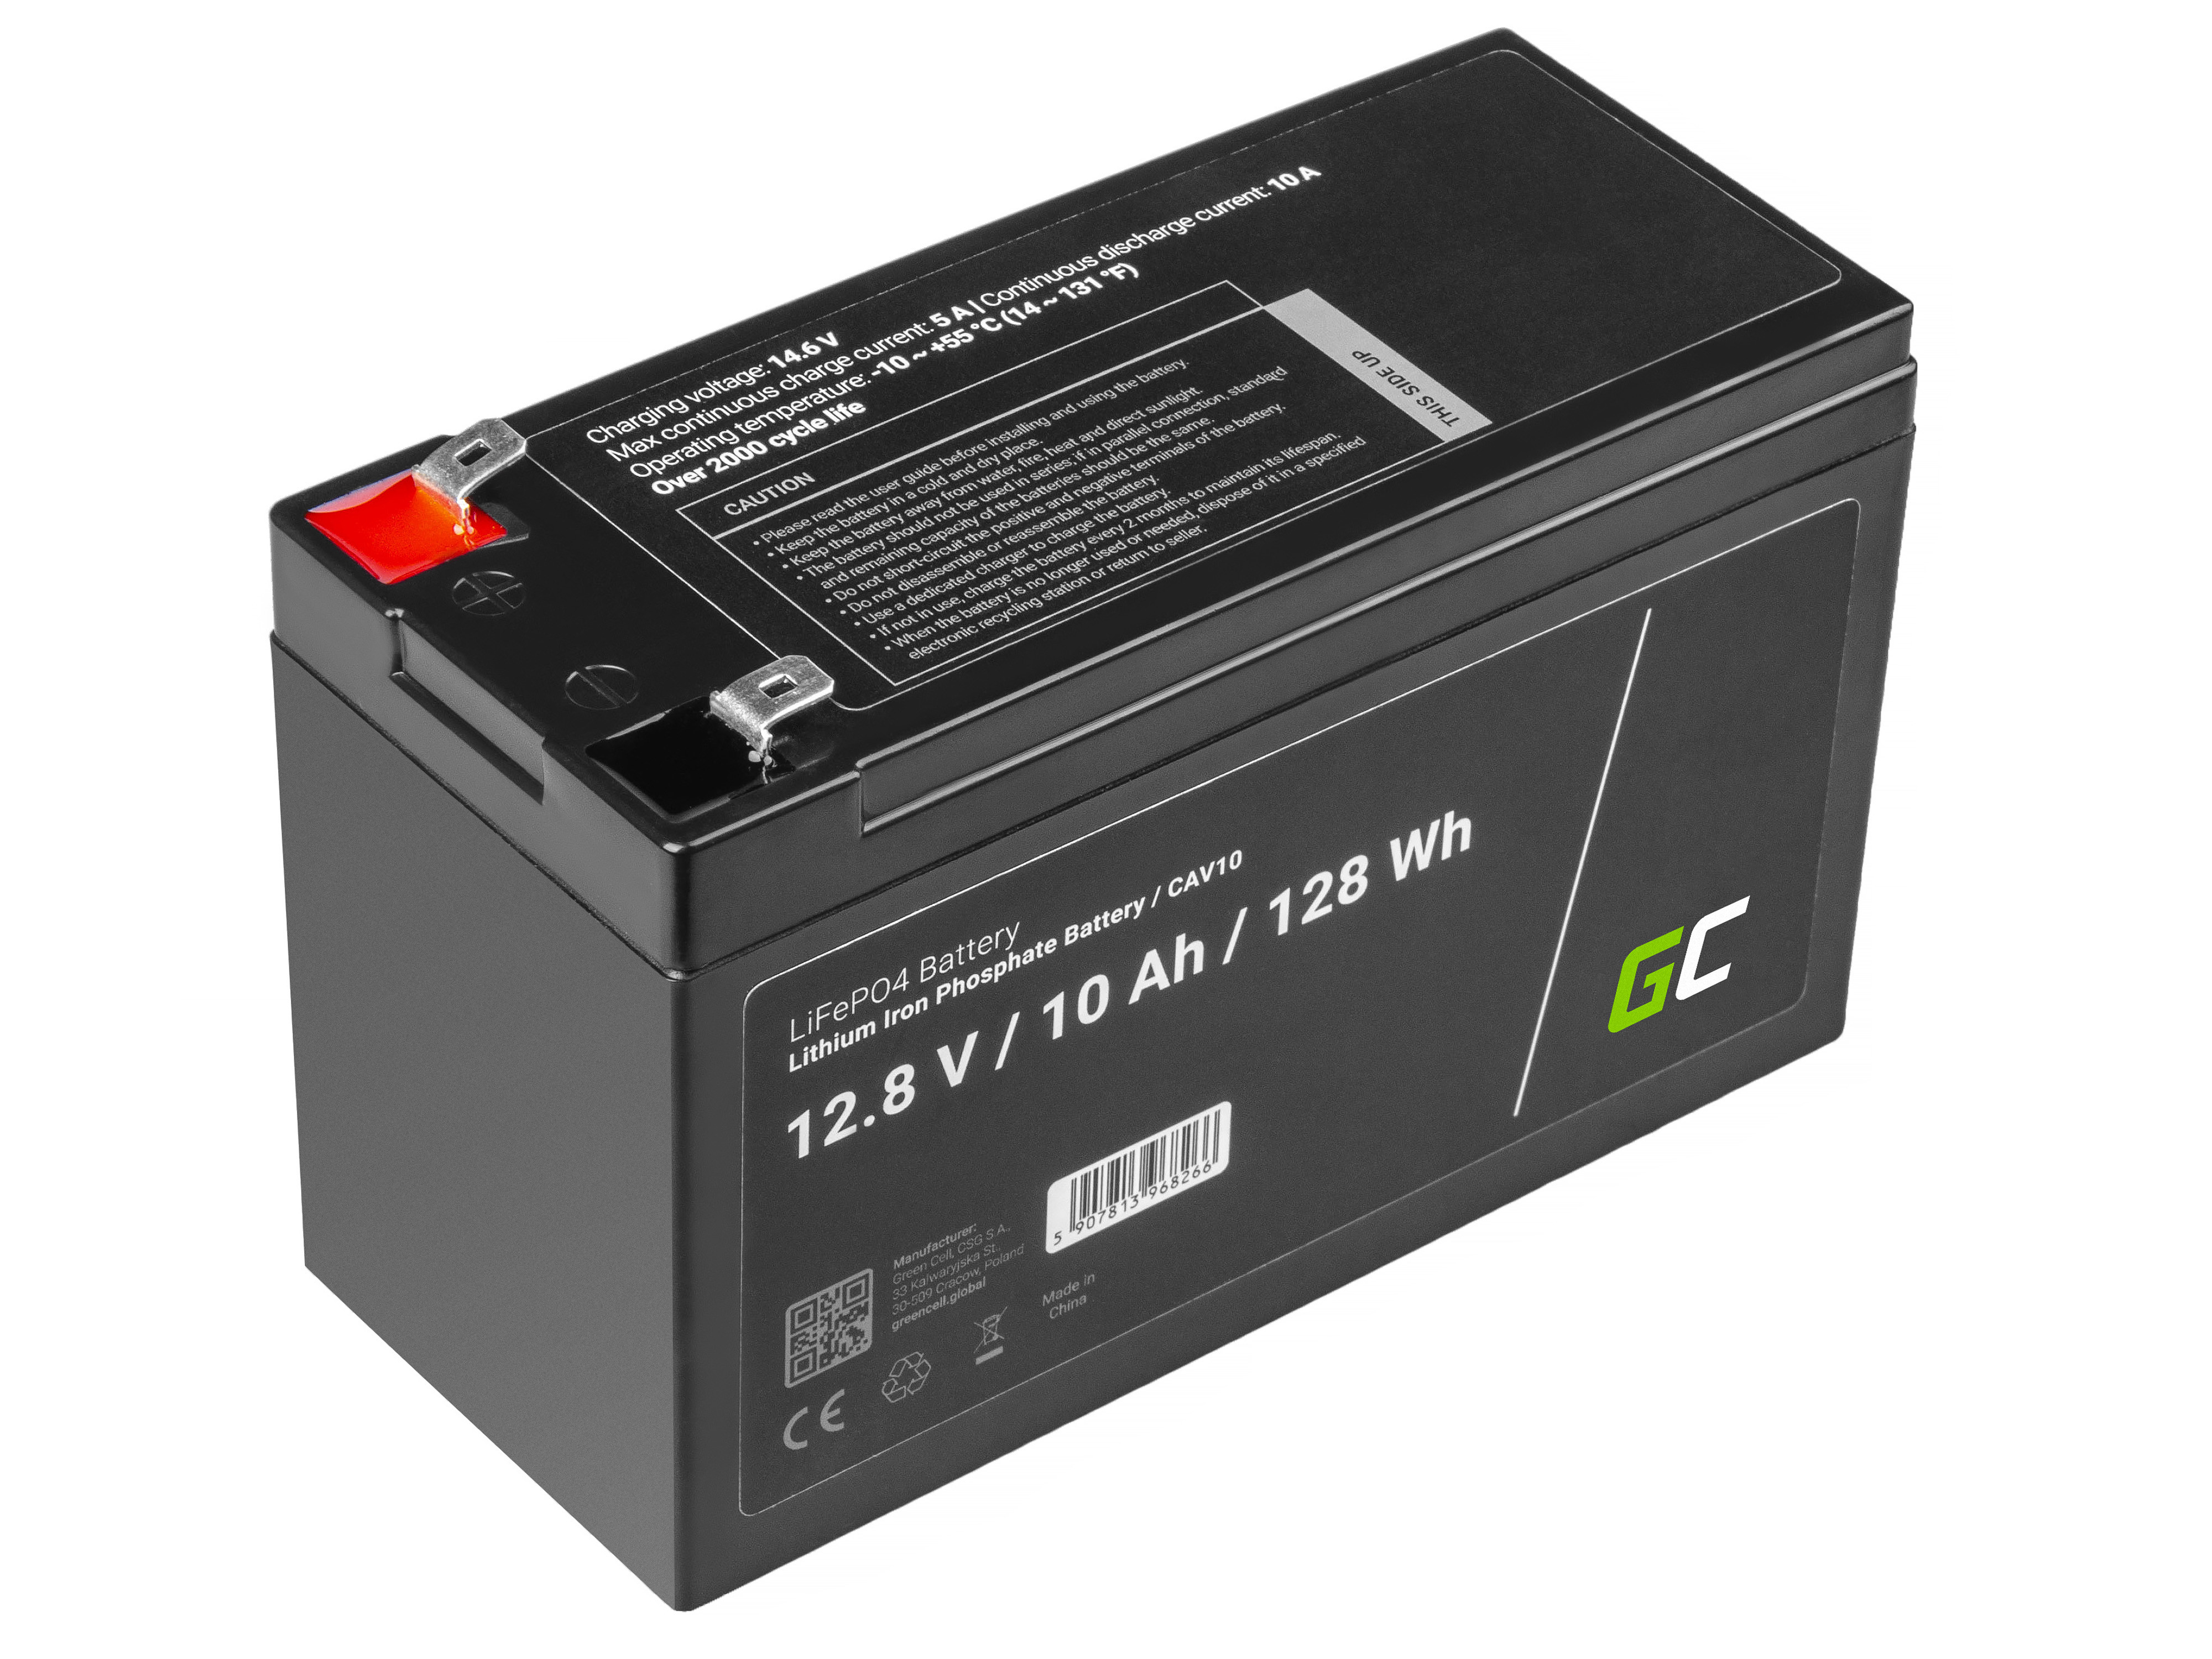 GREEN CELL LiFePO4 Battery for Photovoltaic Campers & Boats